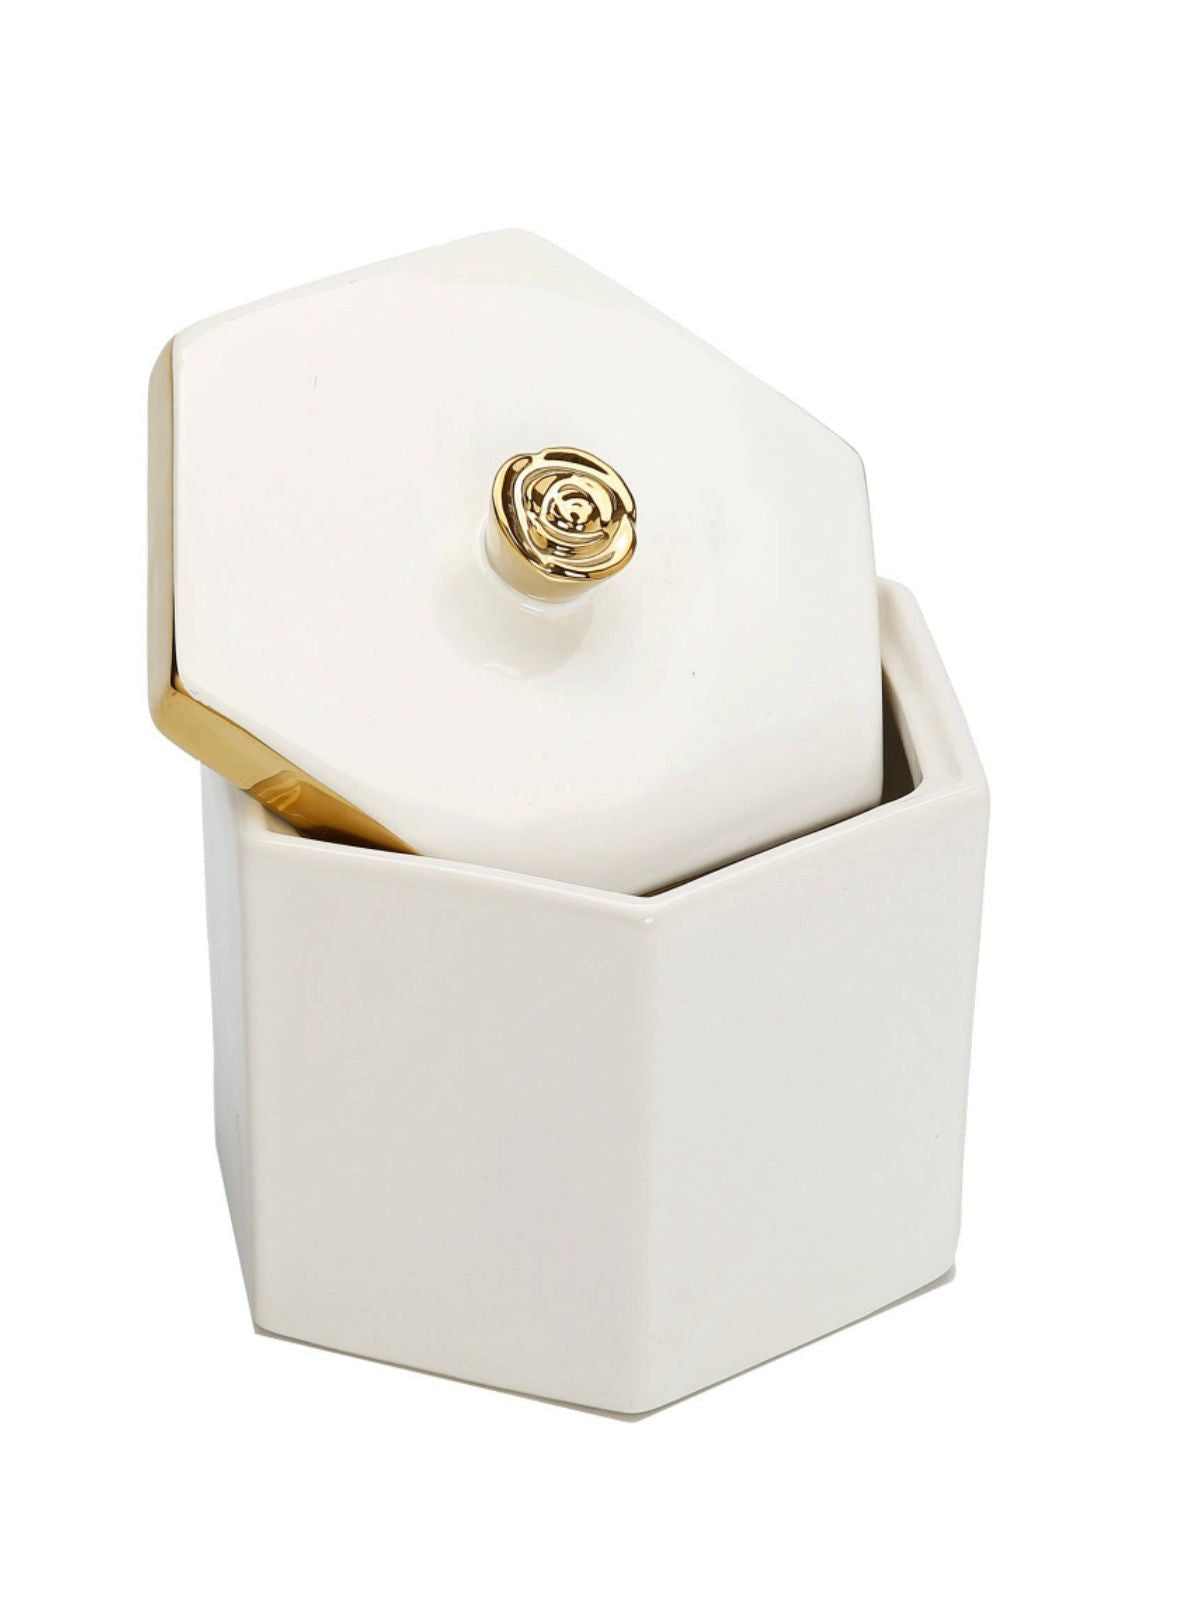 5.9H Decorative White Ceramic Jar with Luxury Gold Flower Knob and Lid - KYA Home Decor